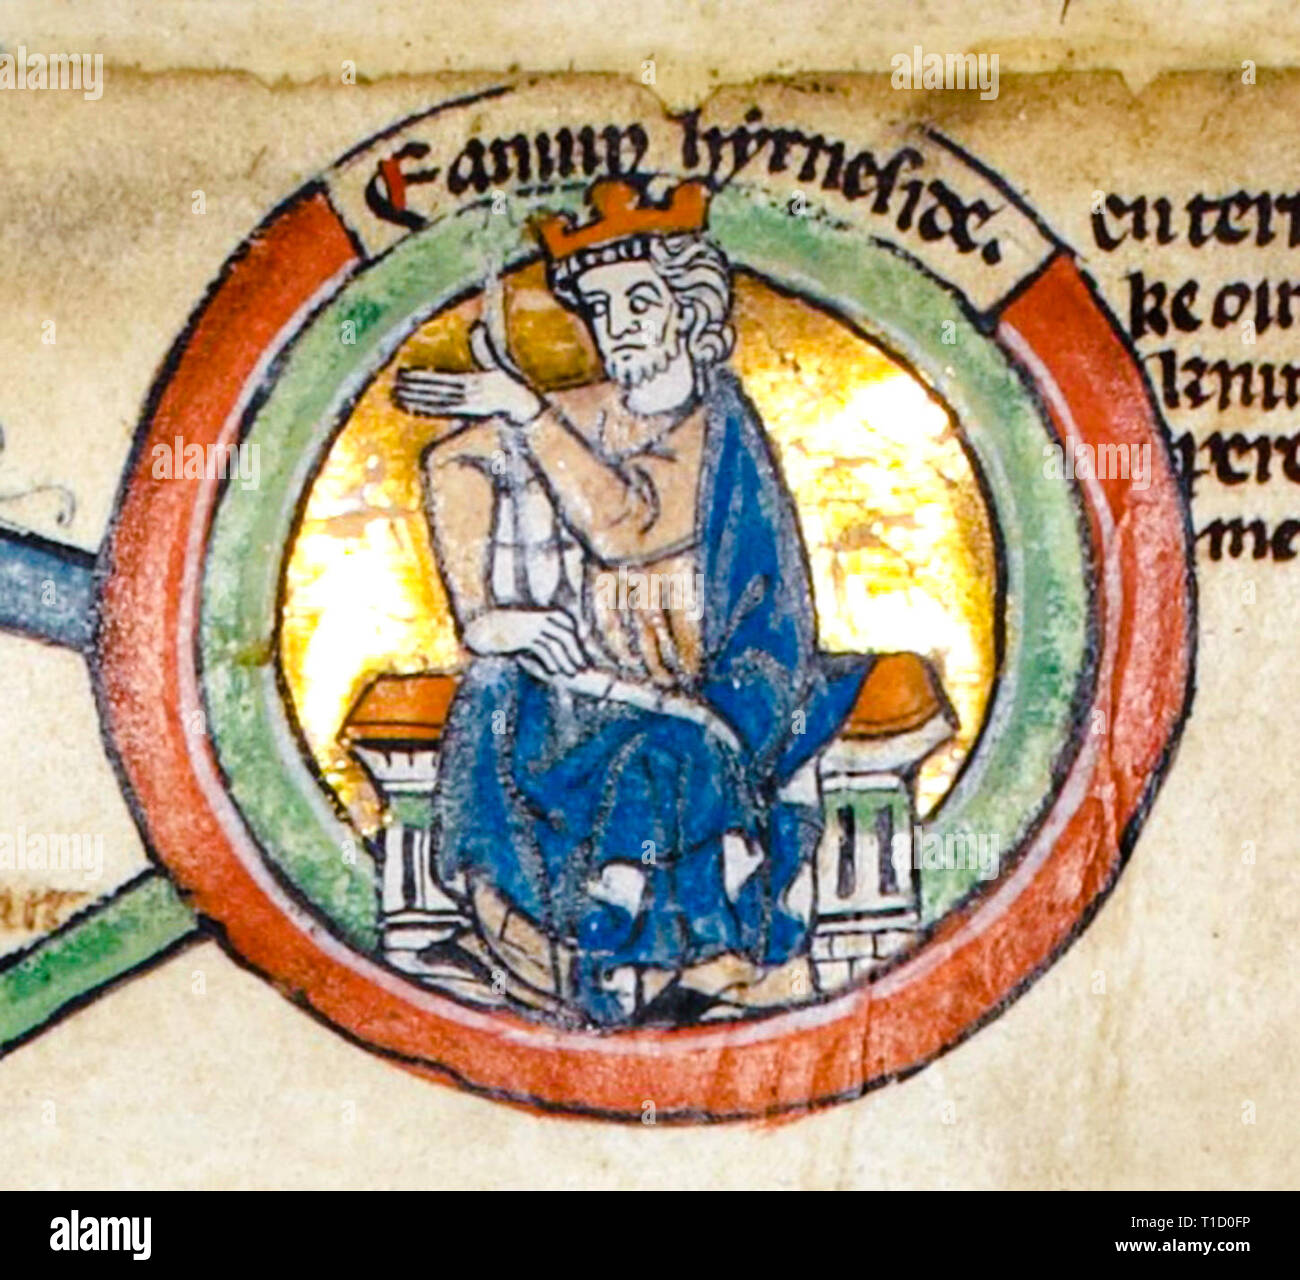 King Edmund Ironside (circa 990-1016), portrait painting in the early 14th Century Genealogical Roll of the Kings of England Stock Photo